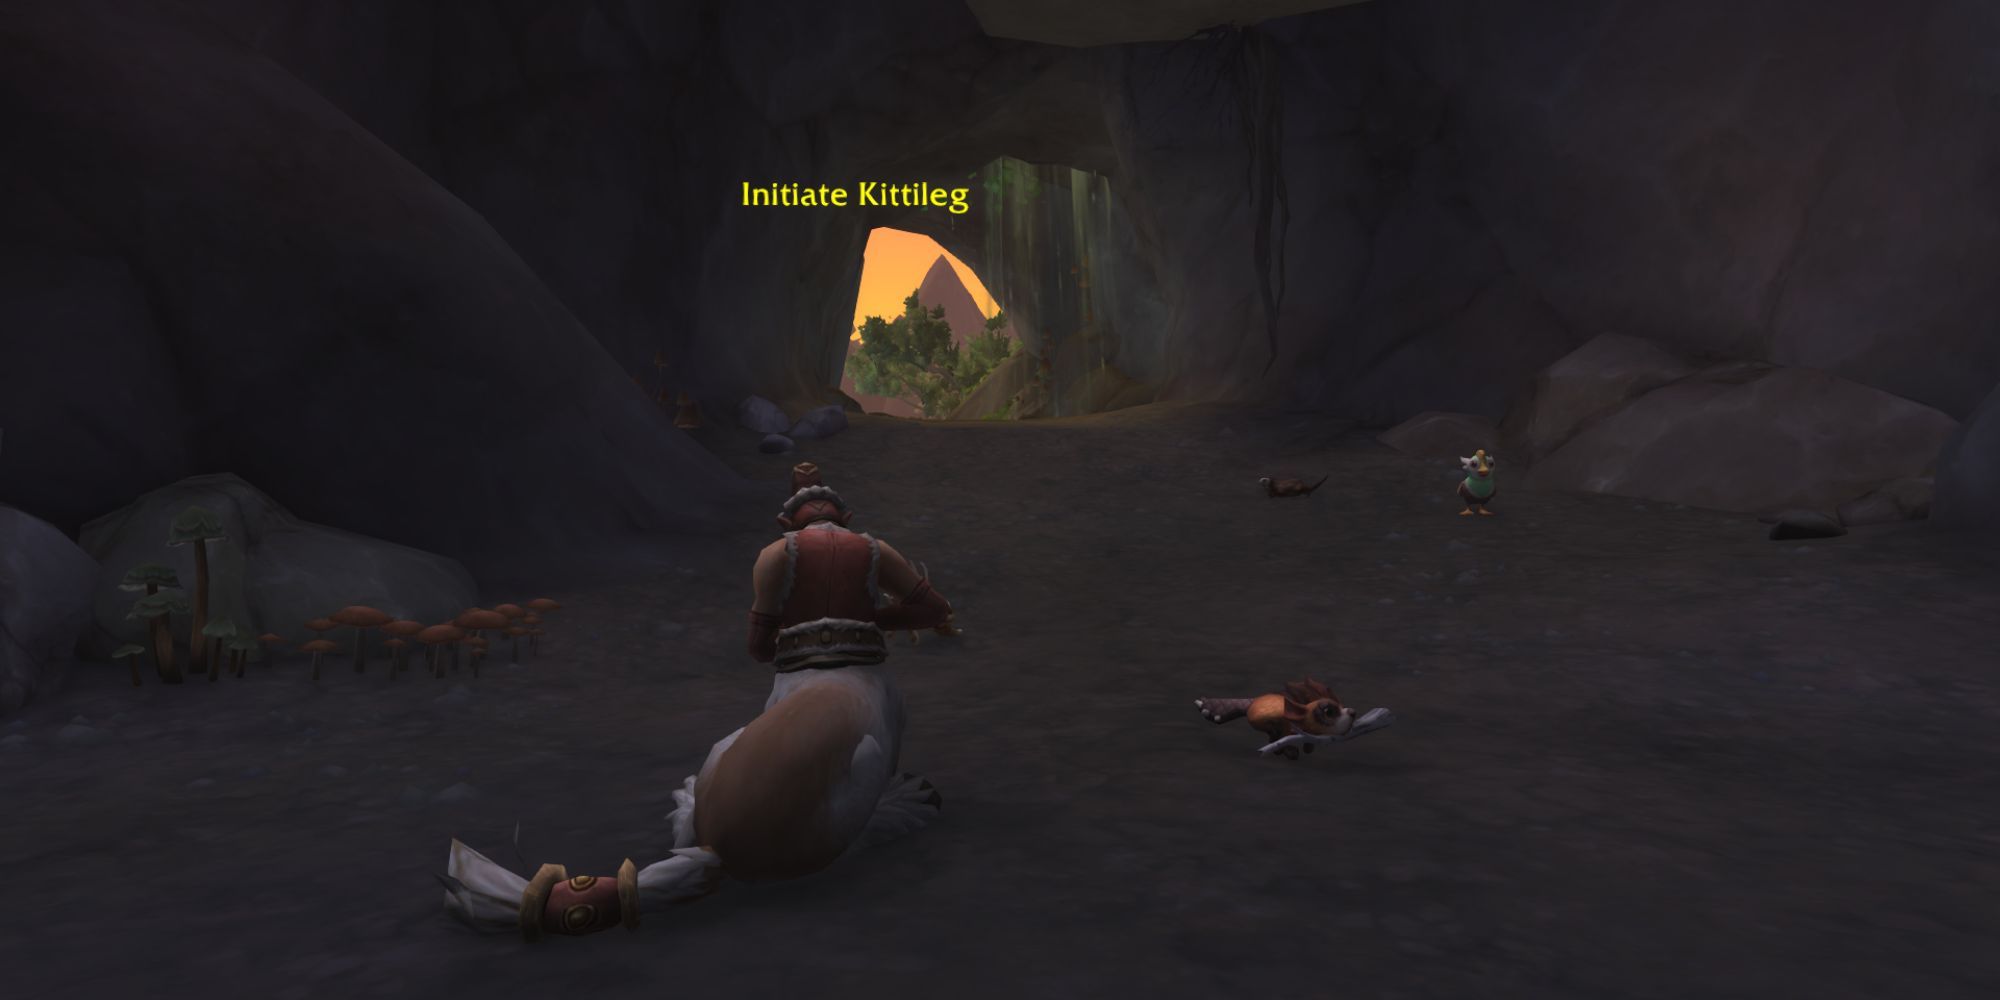 Initiate Kittileg kneeling inside cave with small cute creatures running around